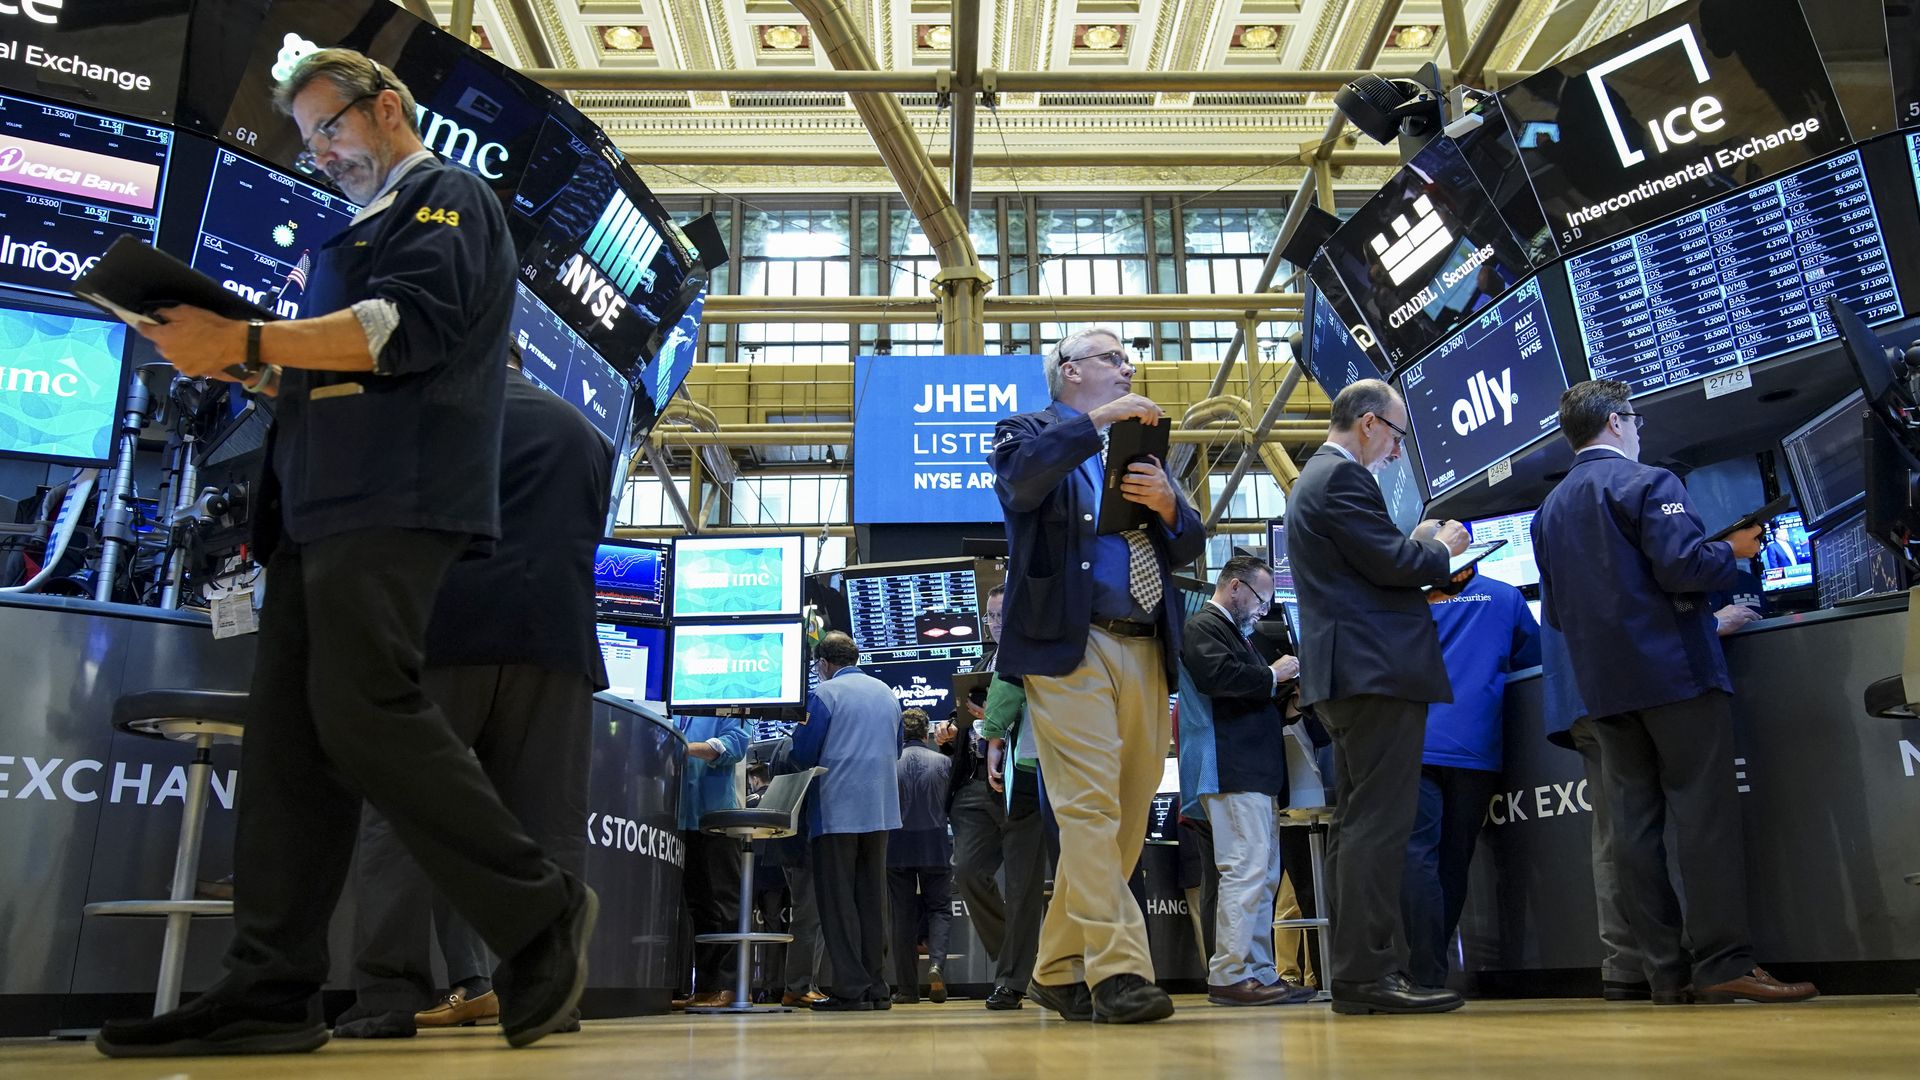 In this image, the camera looks up from the New York Stock Exchange floor as men walk across the floor and look at screens.